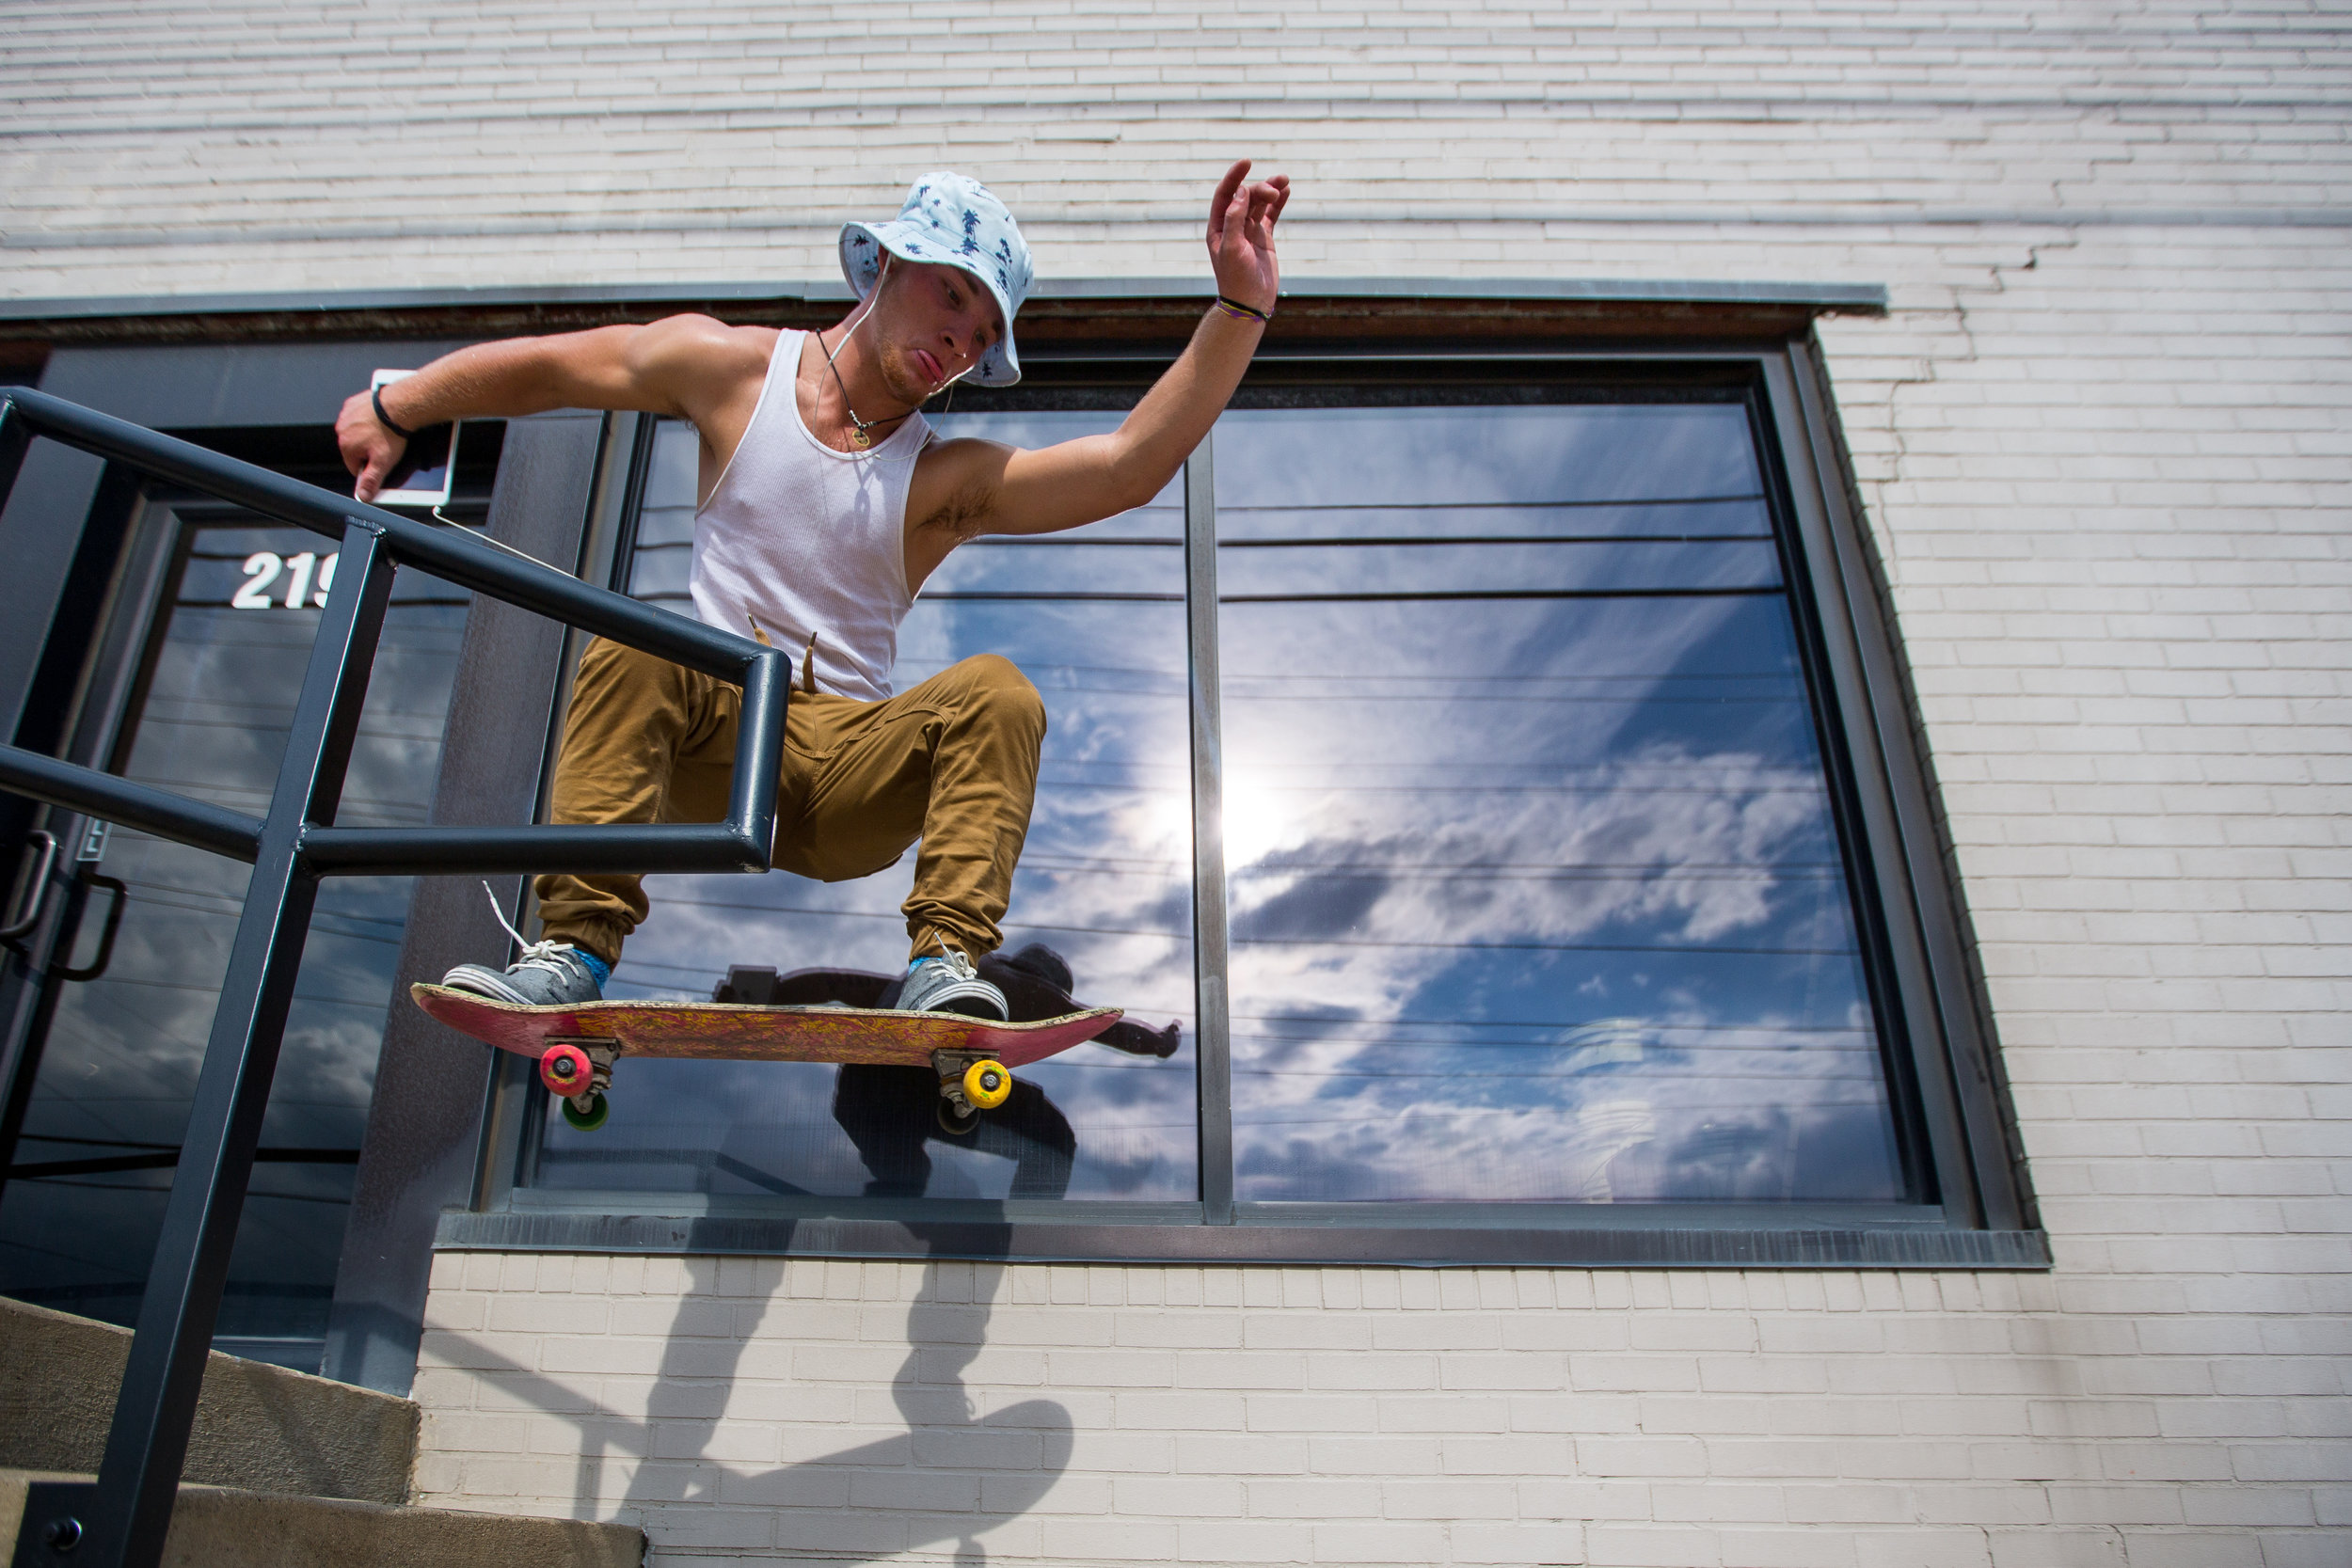  Abraham Sevin of Ambridge skates off of steps in front of a building on Duss Ave. in Ambridge on Thursday afternoon.  